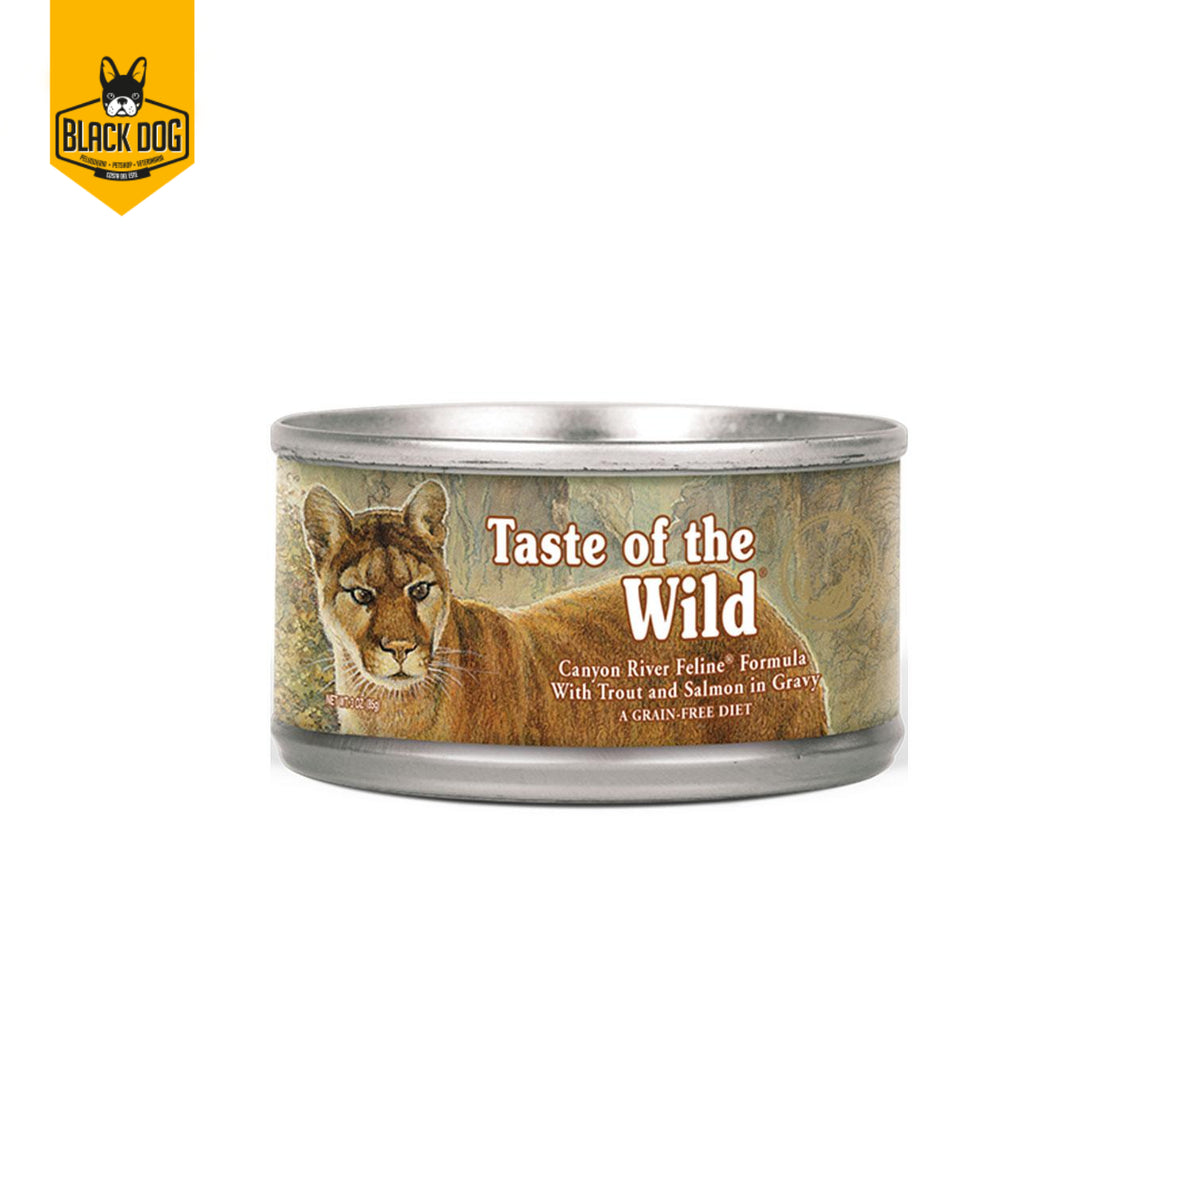 TASTE OF THE WILD | Canyon River Feline Formula | Trout ans Salmon in Gravy | Can 5.5Oz - BlackDogPanama